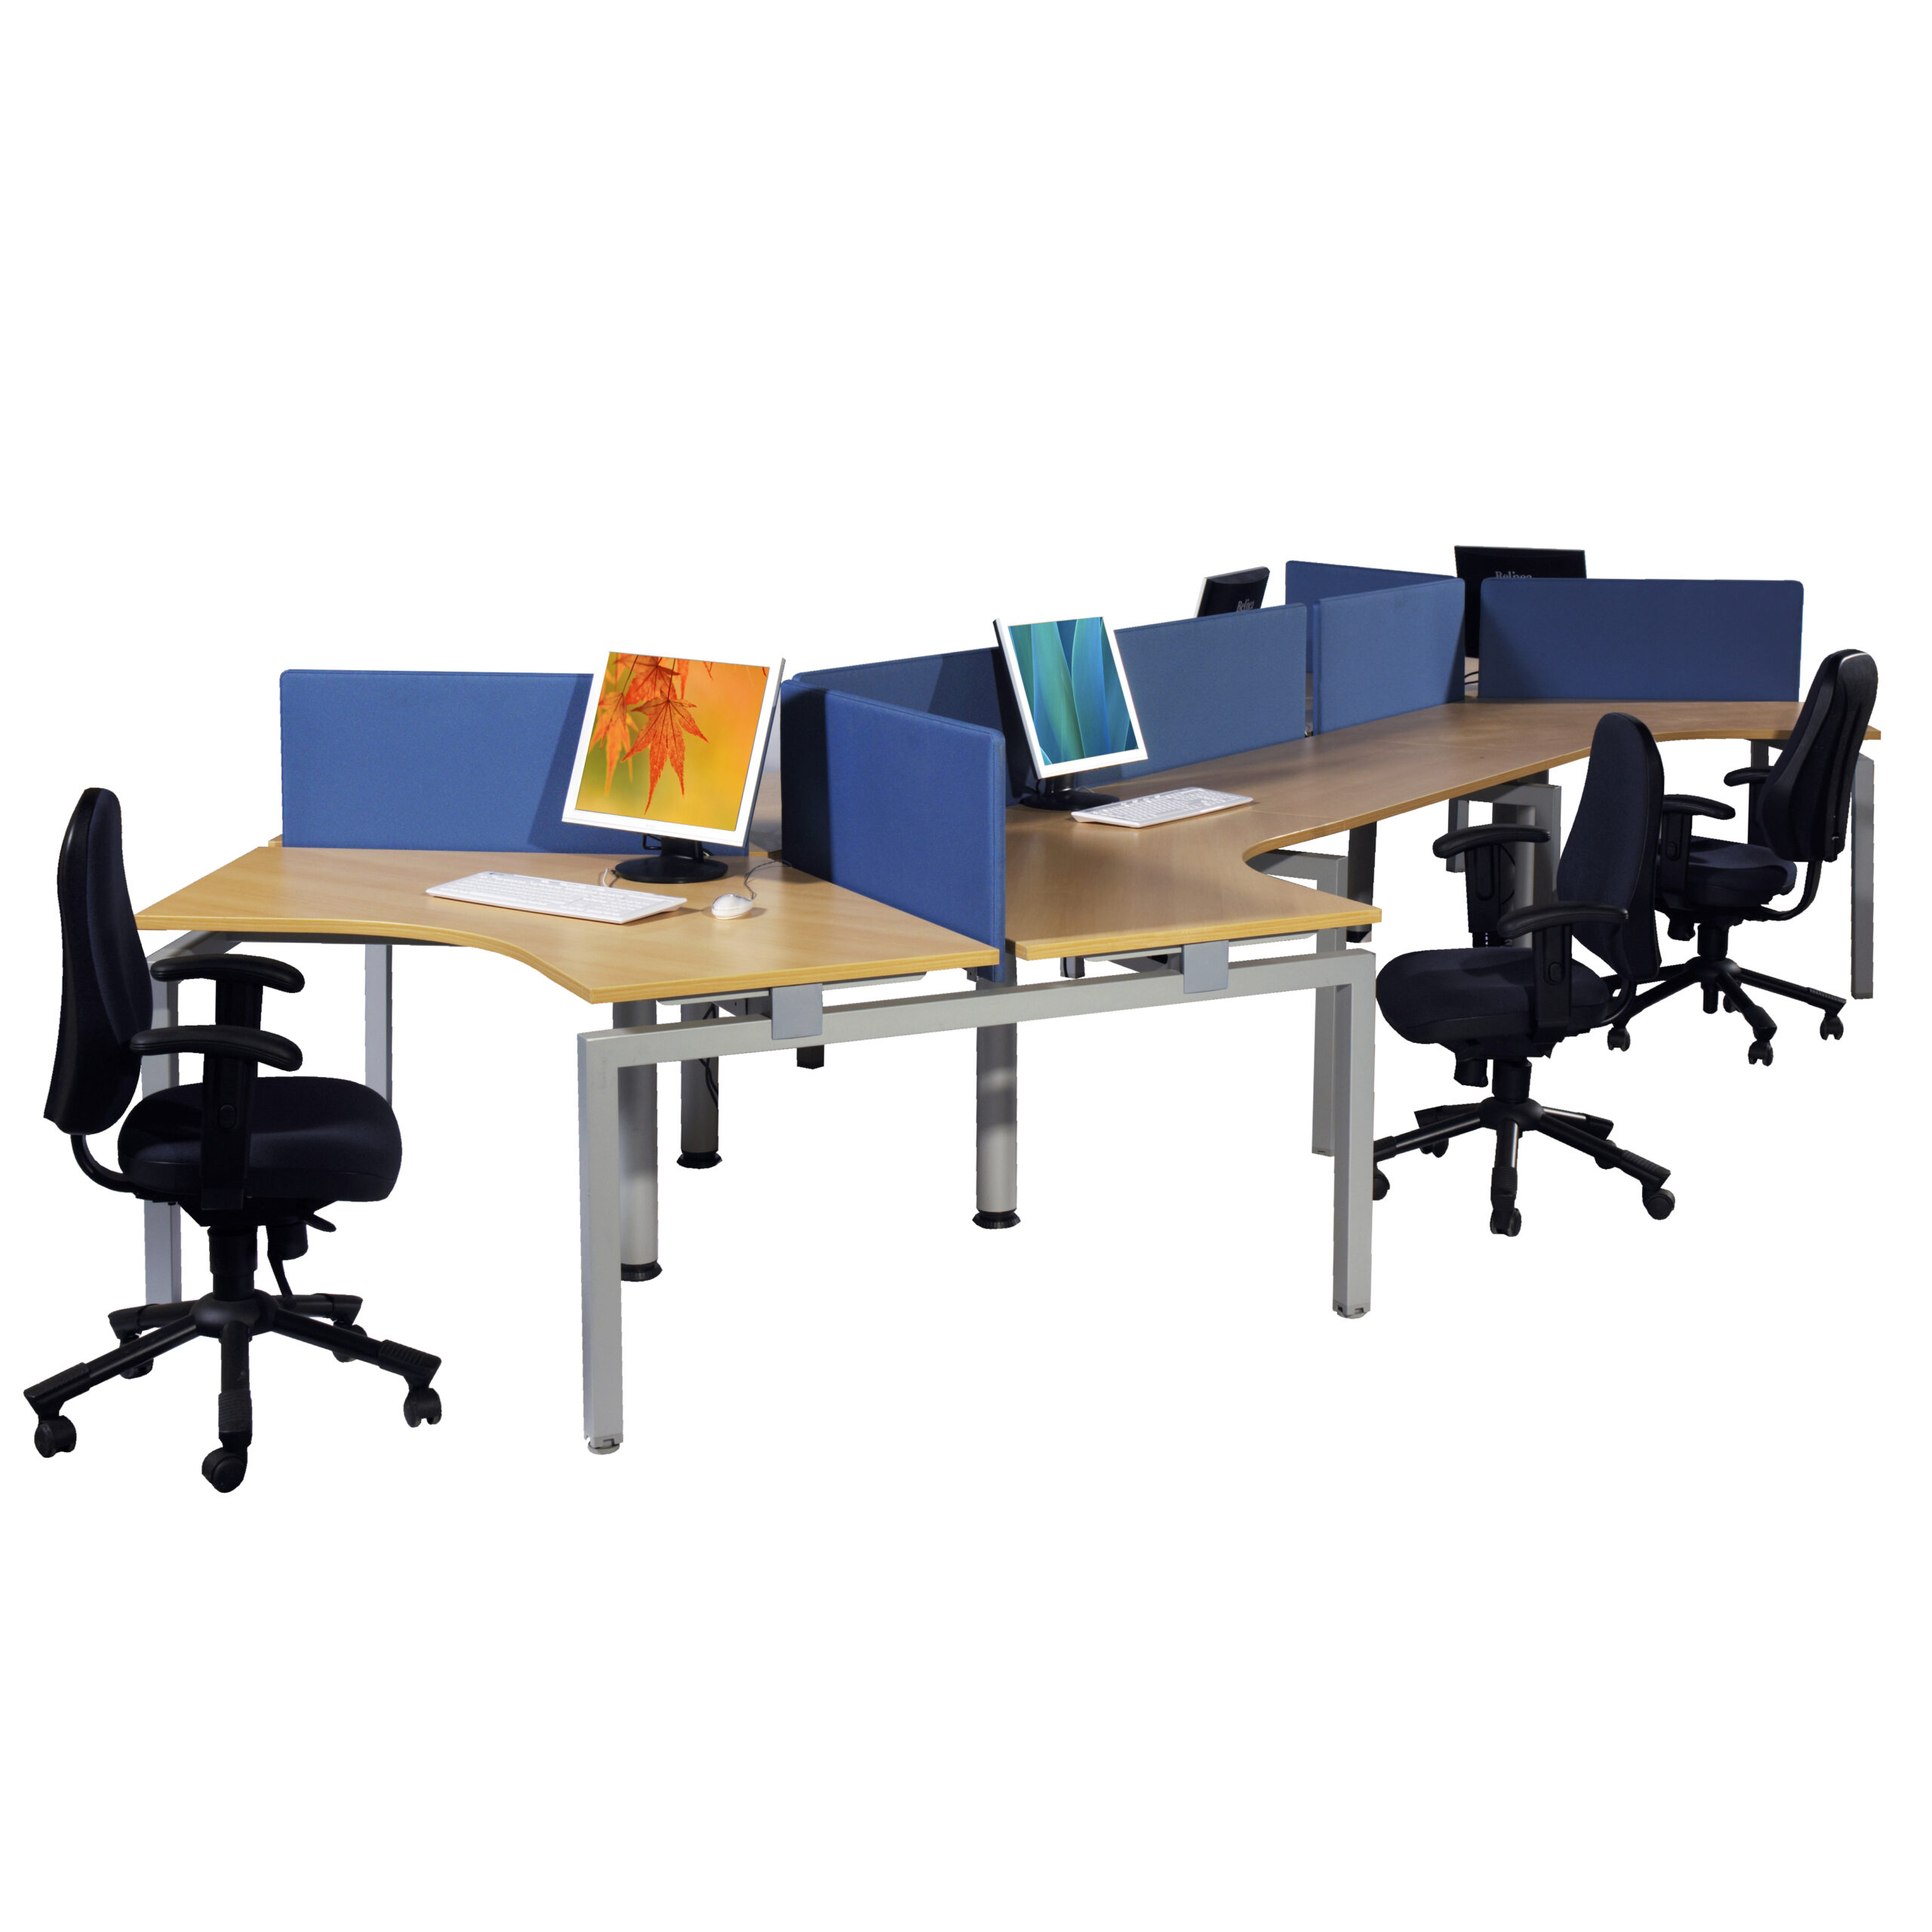 7.Bench Profile - Large open plan office with desk height screens and swivel chairs.